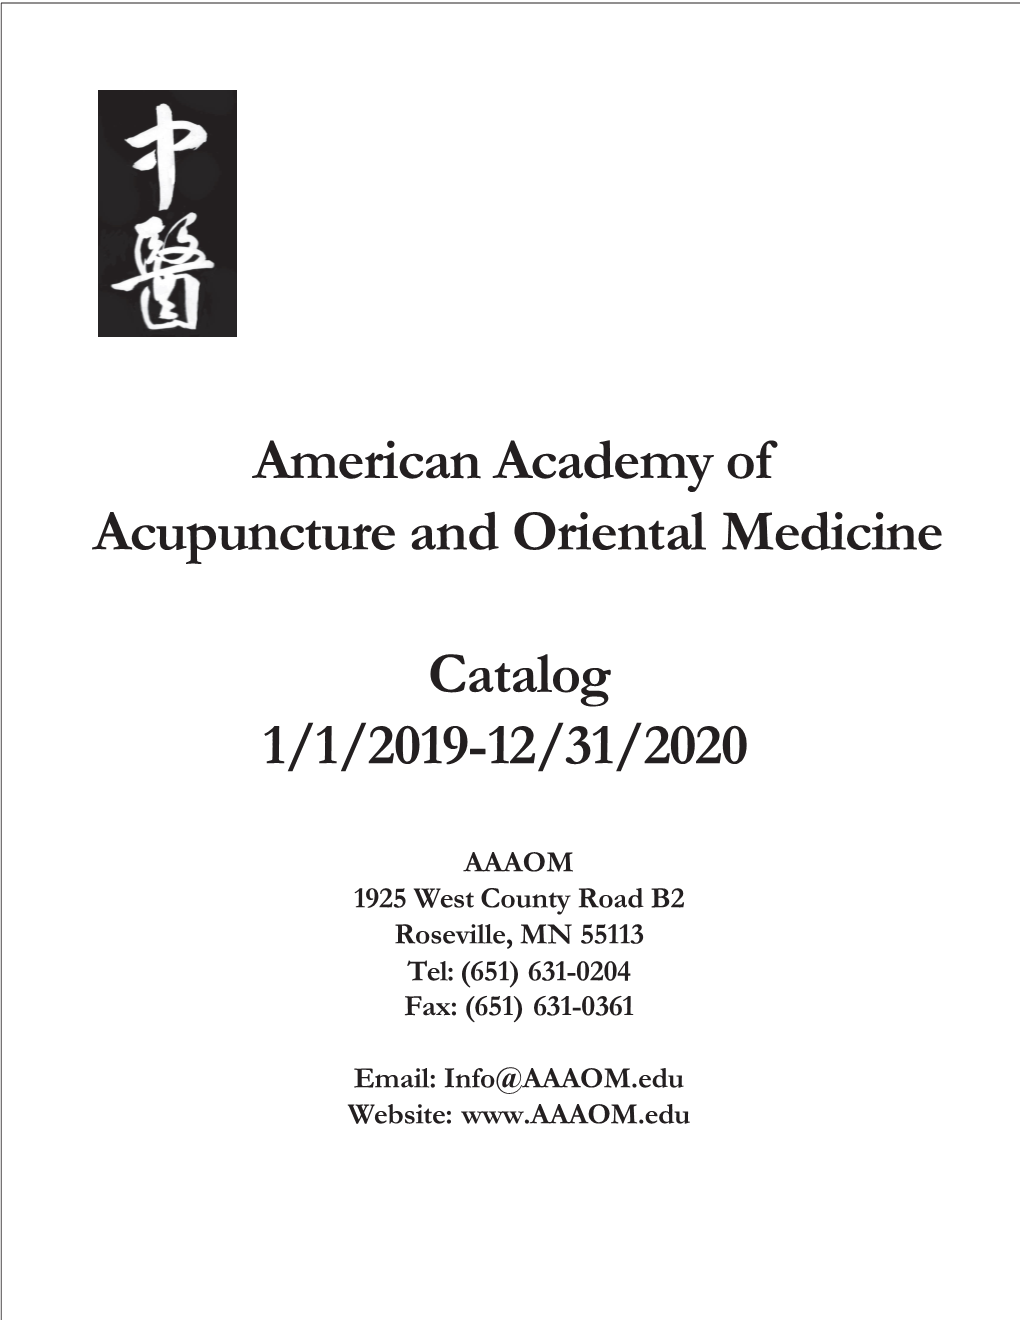 American Academy of Acupuncture and Oriental Medicine Catalog 1/1